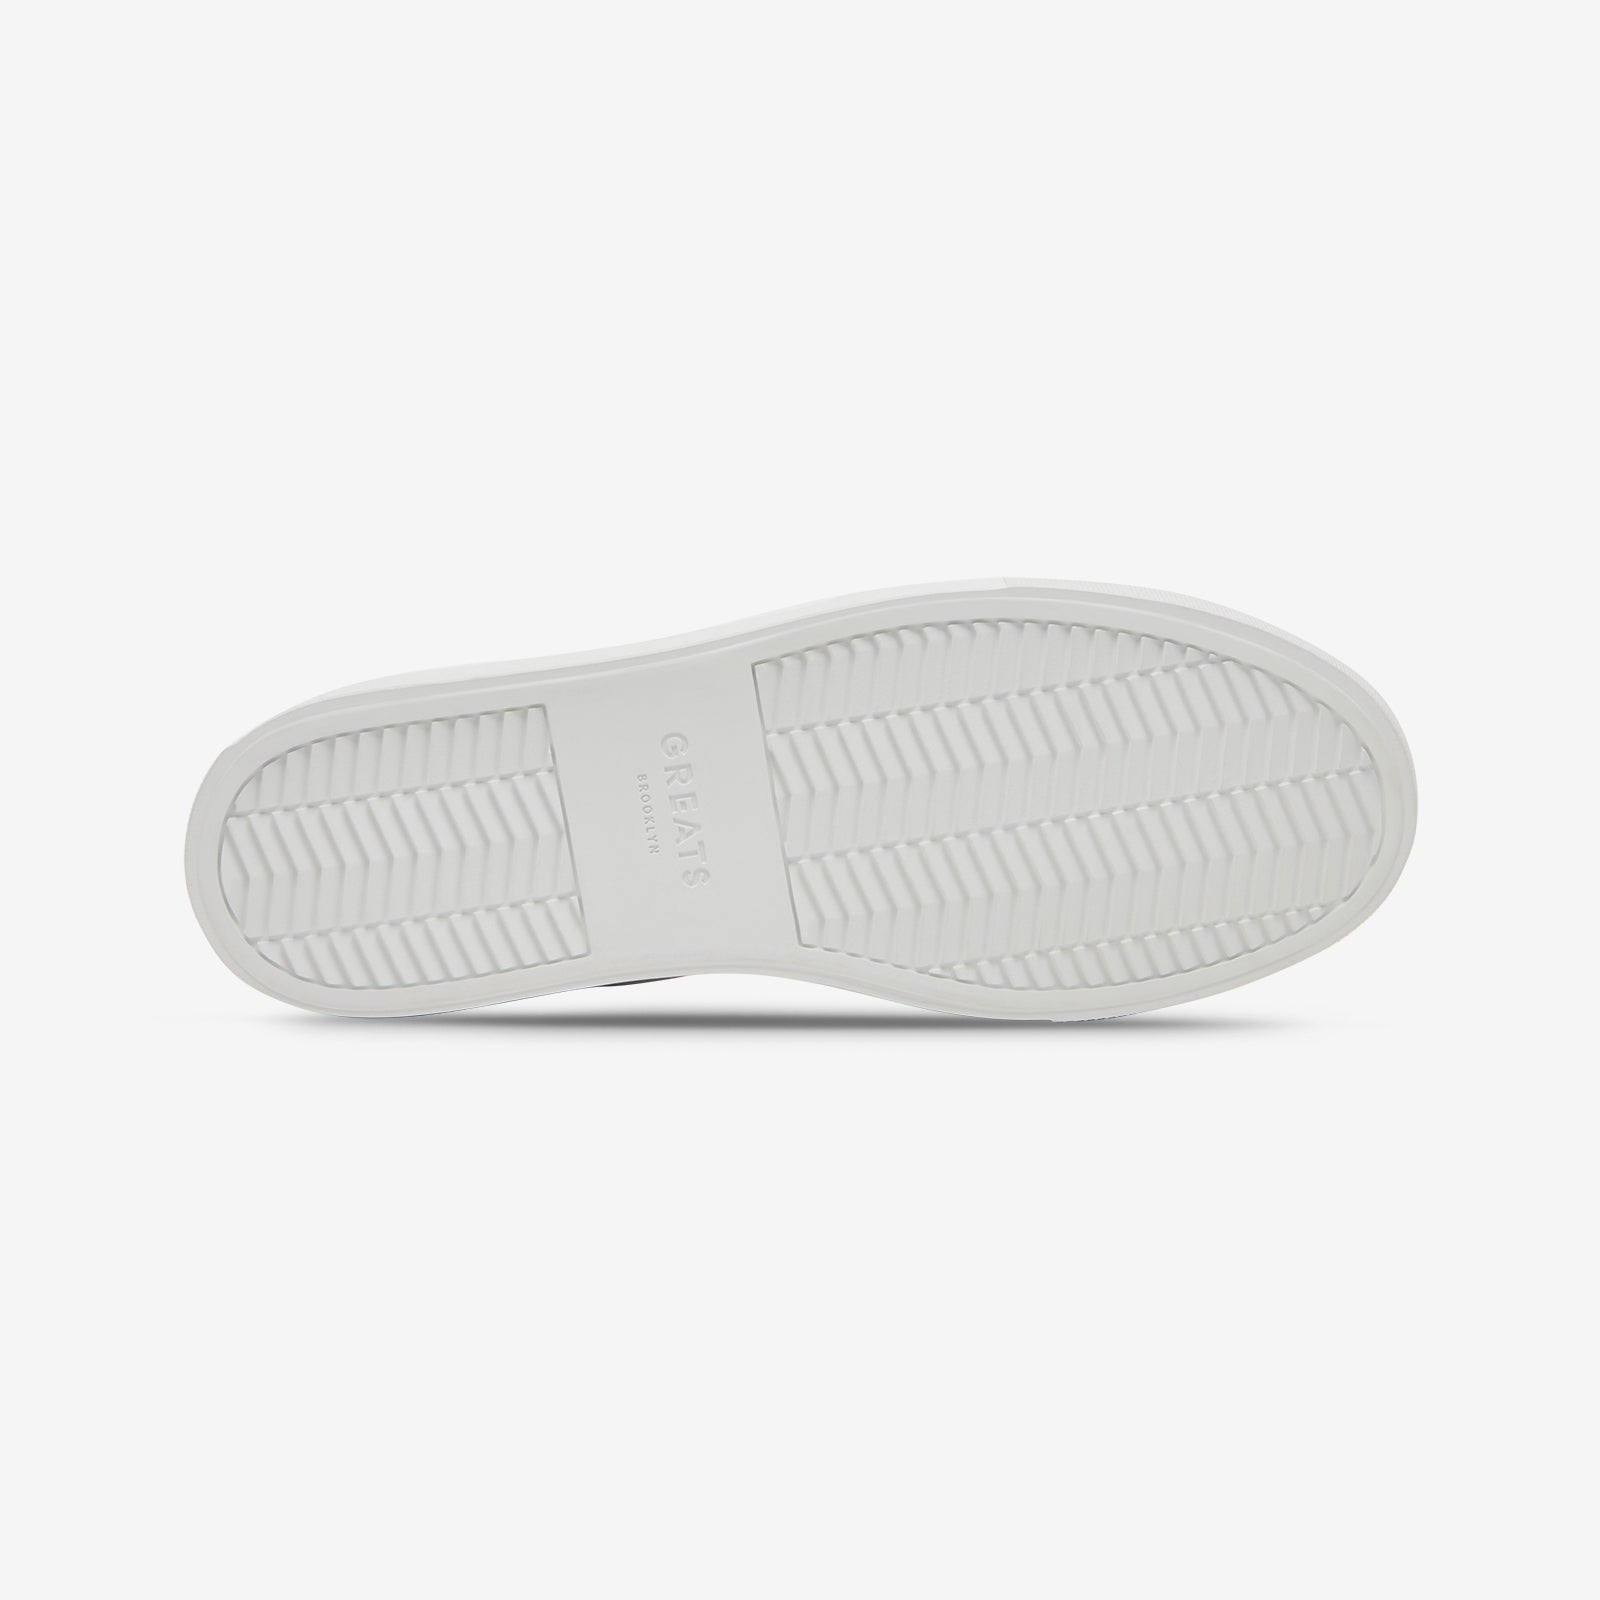 The Royale 2.0 Perforated - Blanco